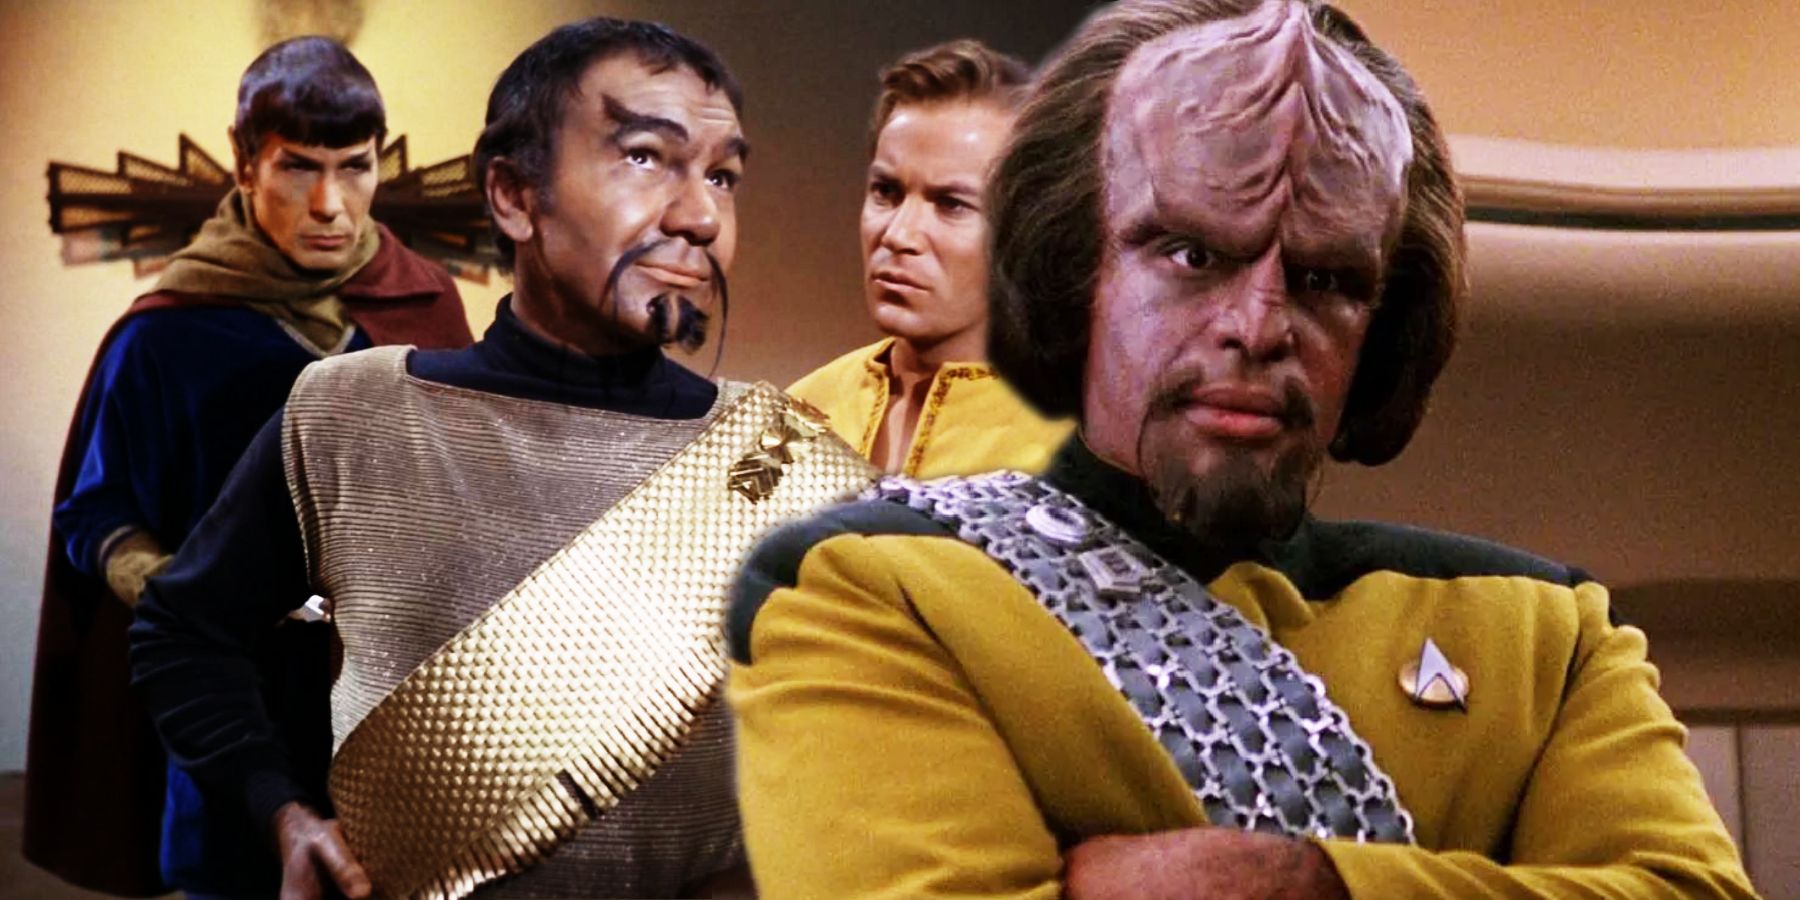 Spock, Kor and Kirk in TOS and Worf in TNG